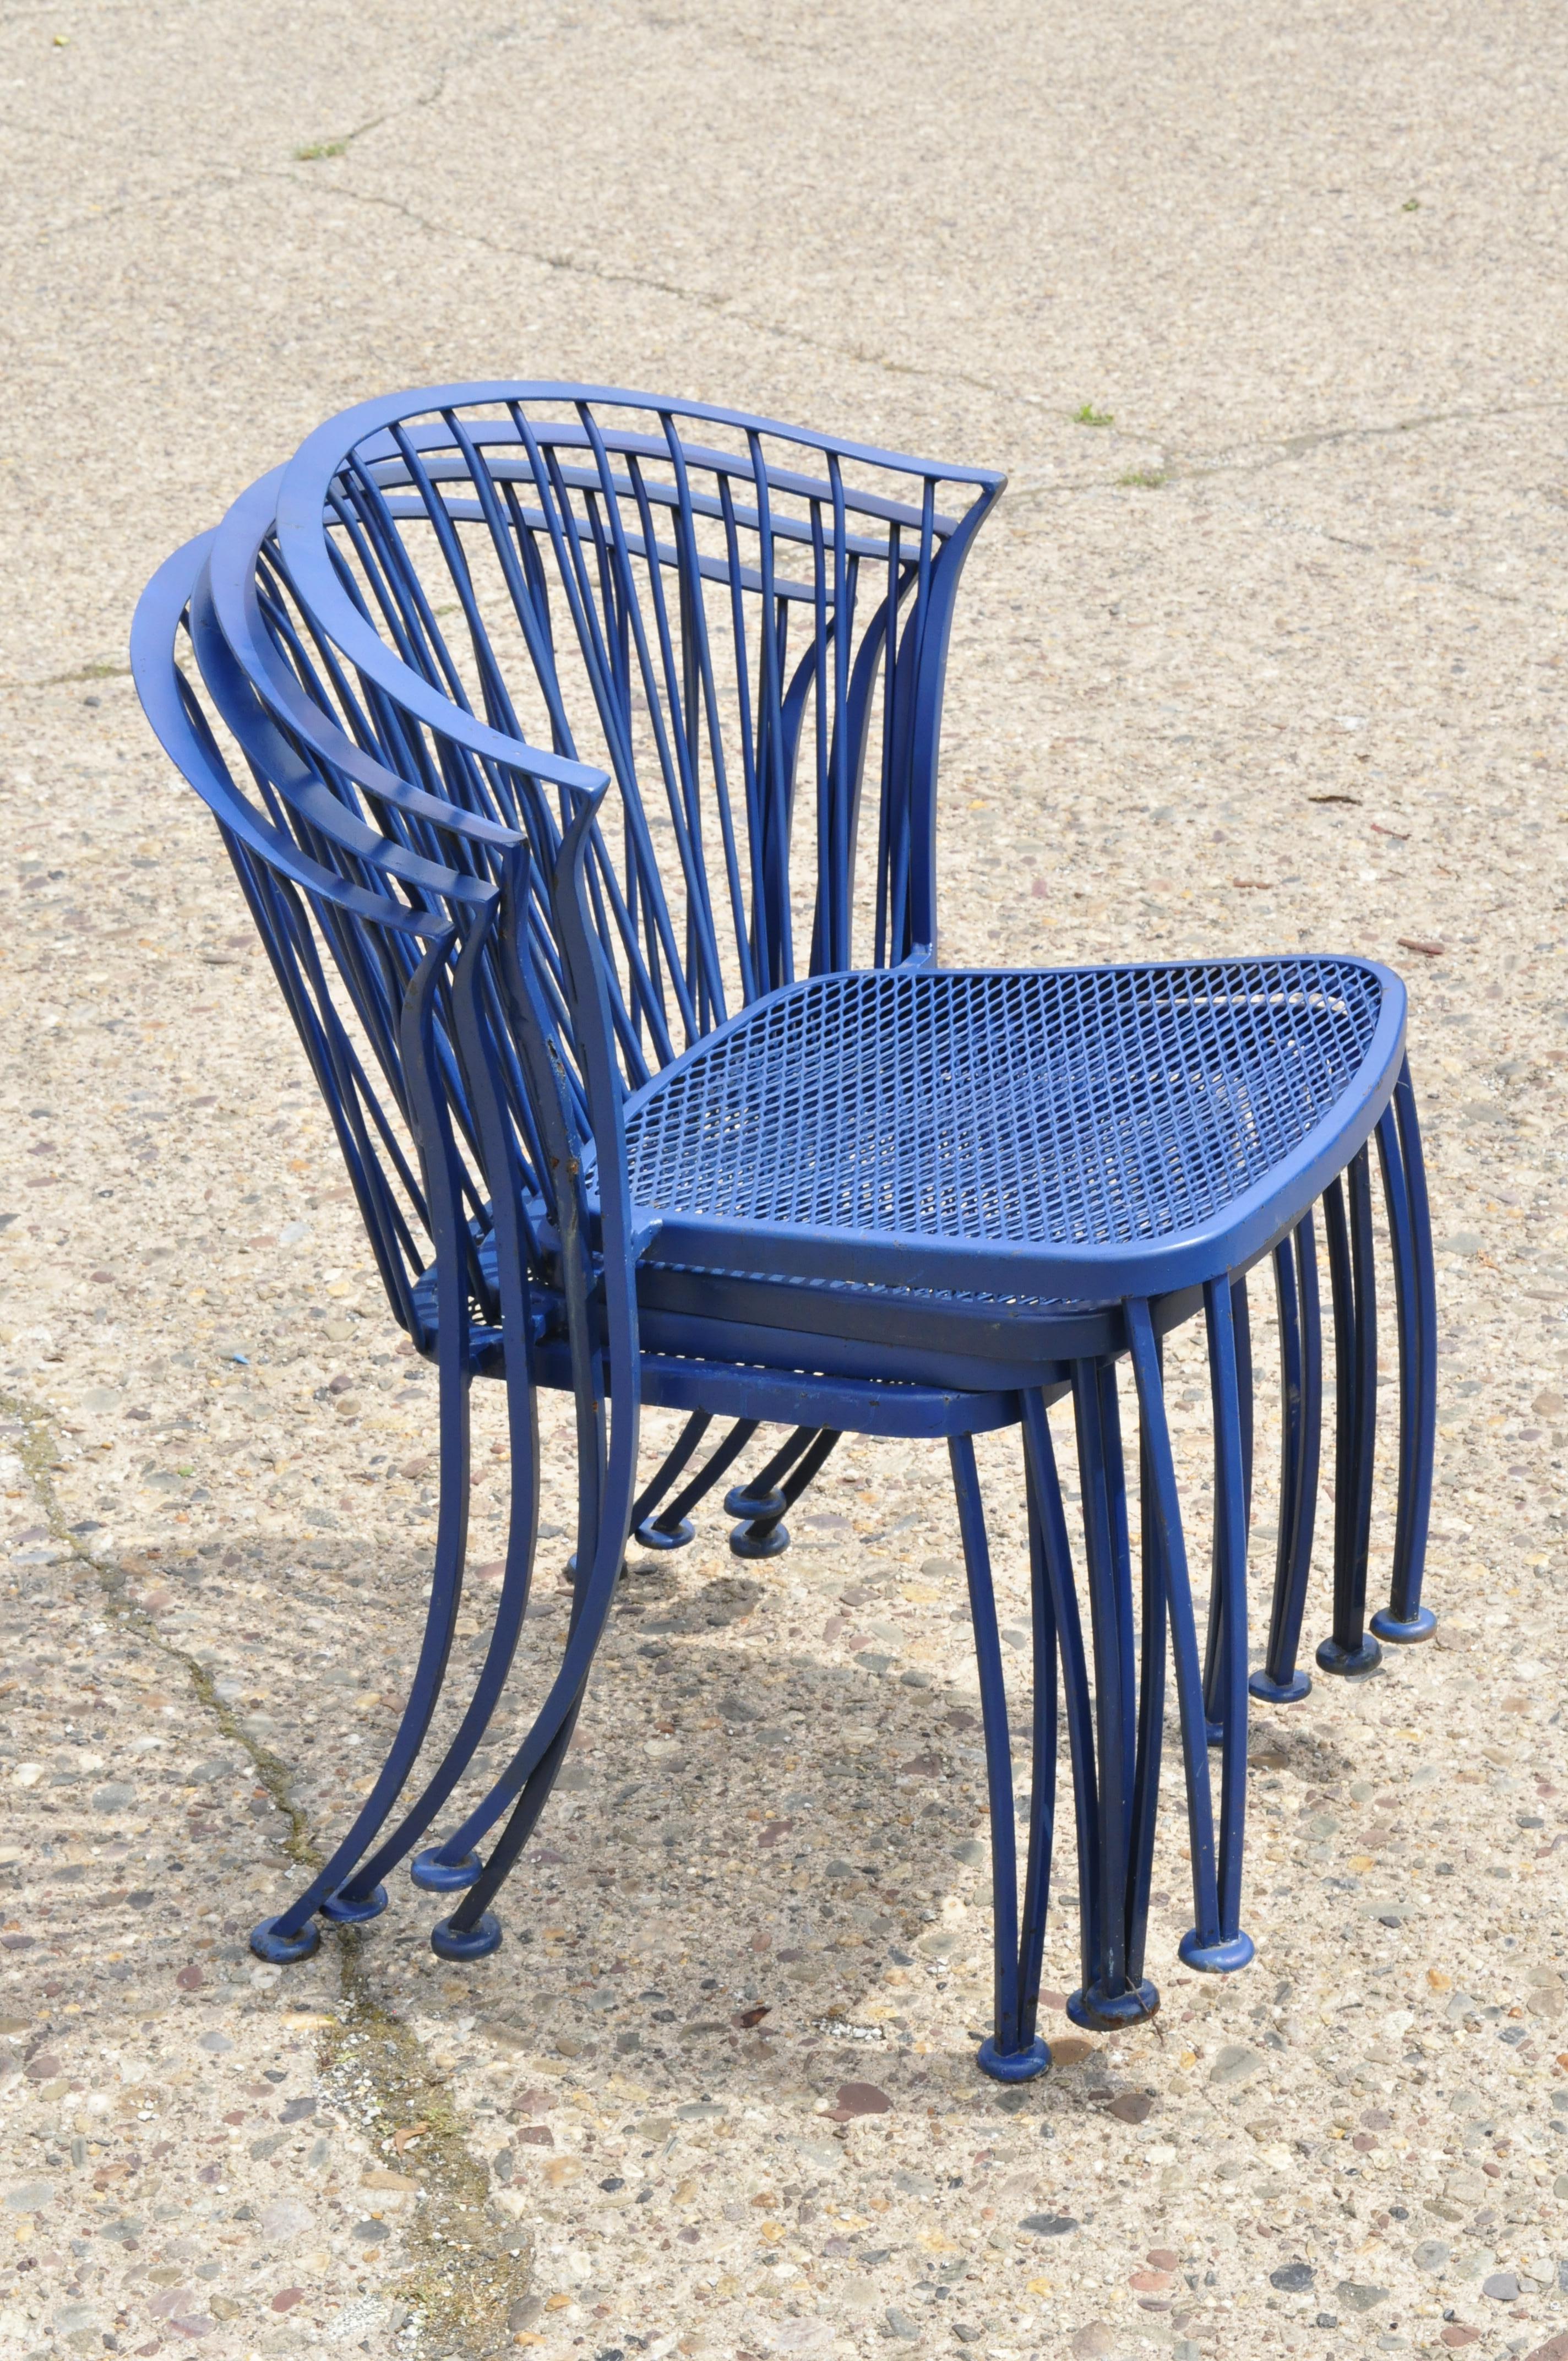 Woodard Pinecrest Blue Wrought Iron 5pc Patio Garden Dining 4 Chairs Round Table 4